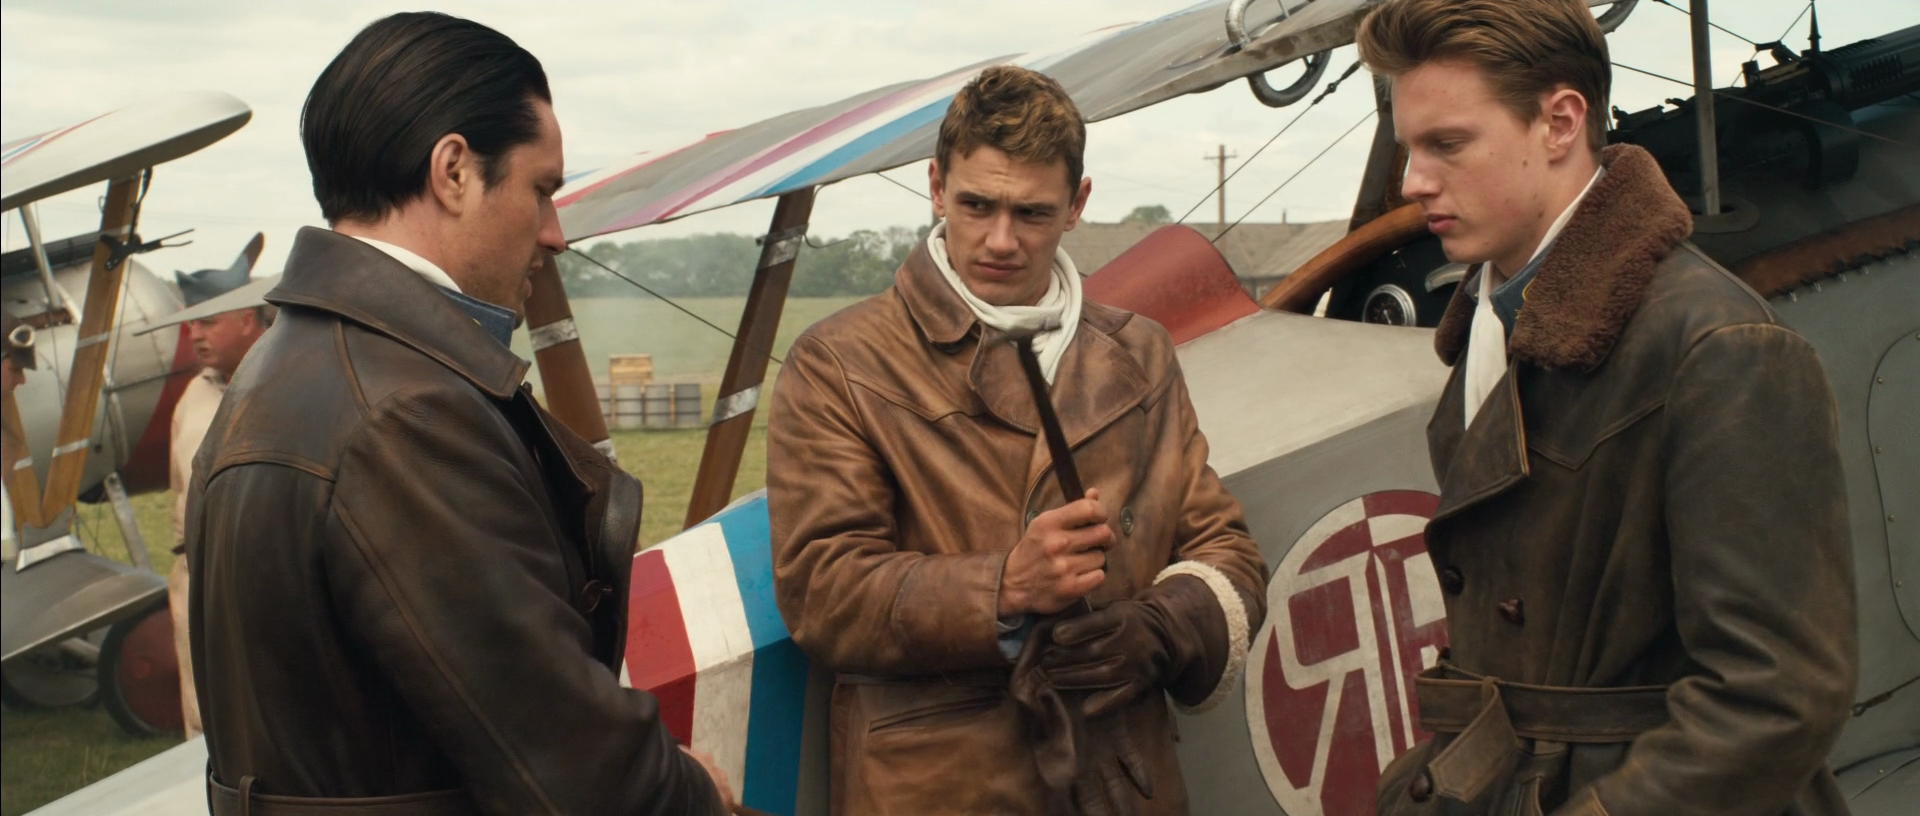 Pilots from one of the scenes in the film Flyboys